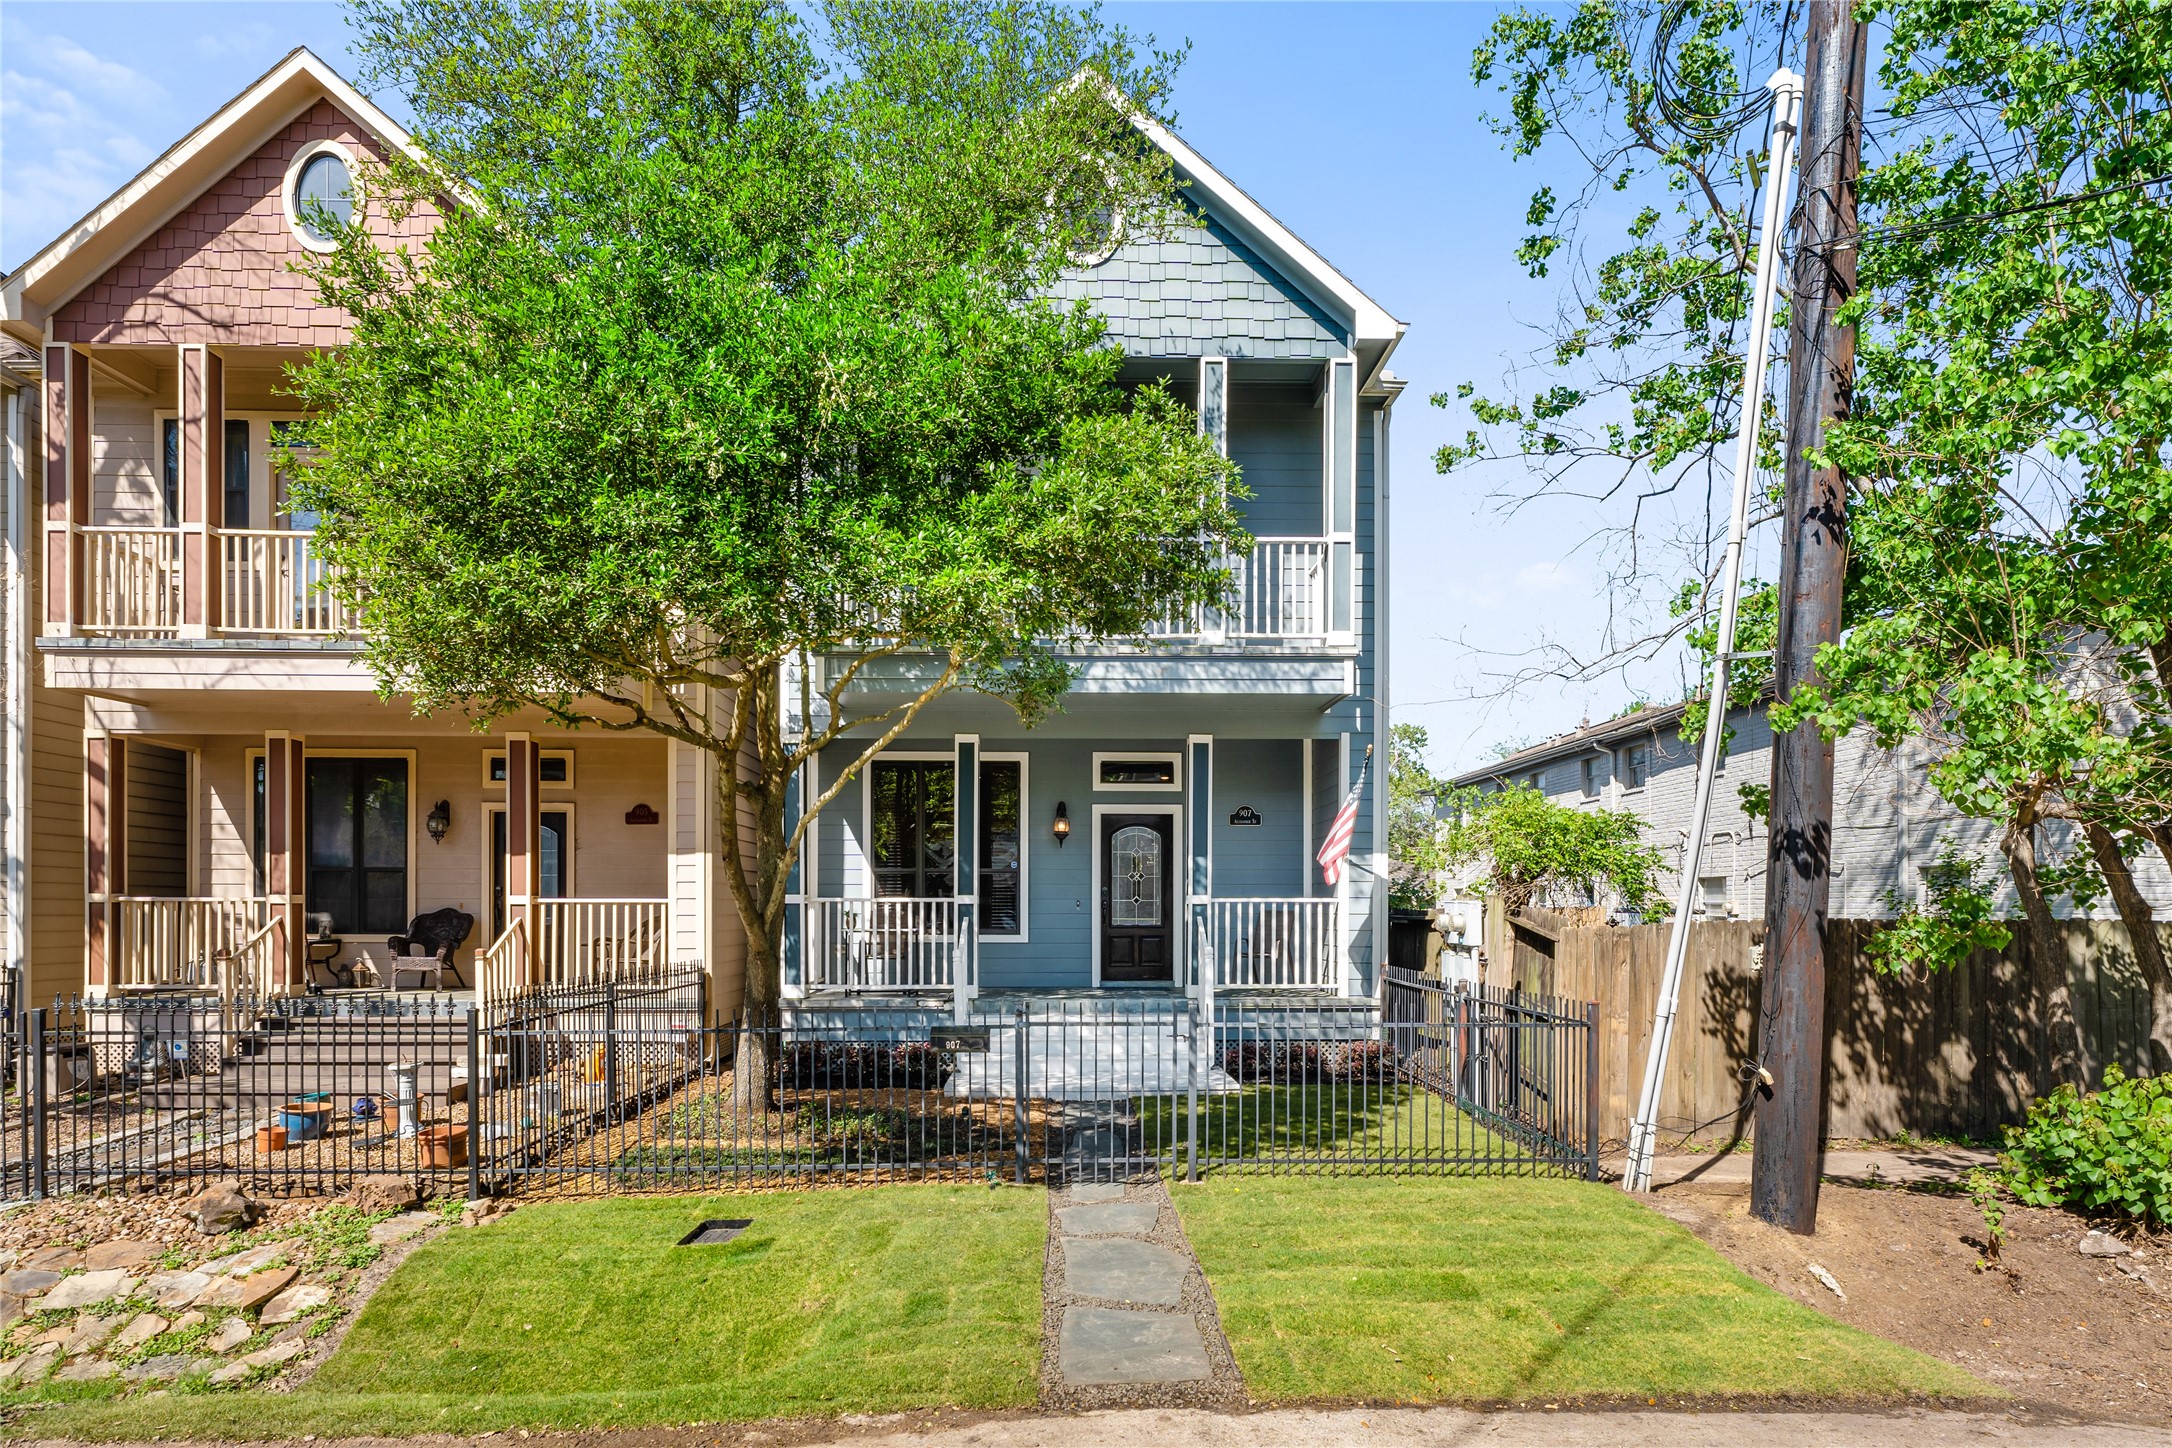 907 Alexander offers a freshly landscaped yard with new automatic sprinklers, a new AC (2022), and a well-maintained interior consisting of beautiful hardwood floors and plenty of space!